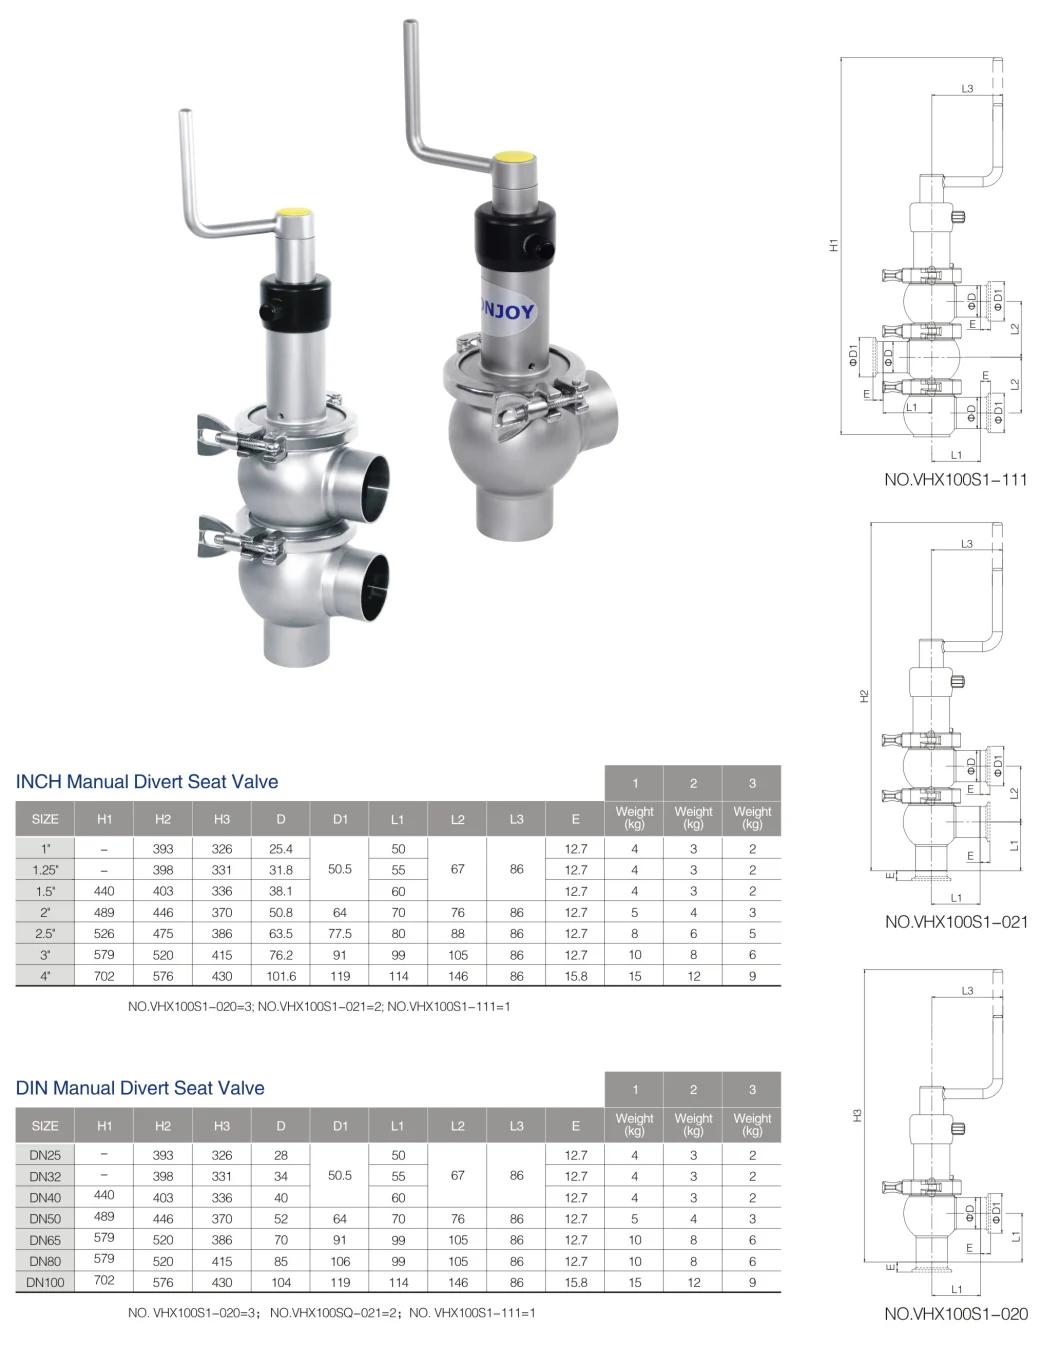 3A Certified Sanitary Shutoff Divert Valve for Food Beverage Brewery